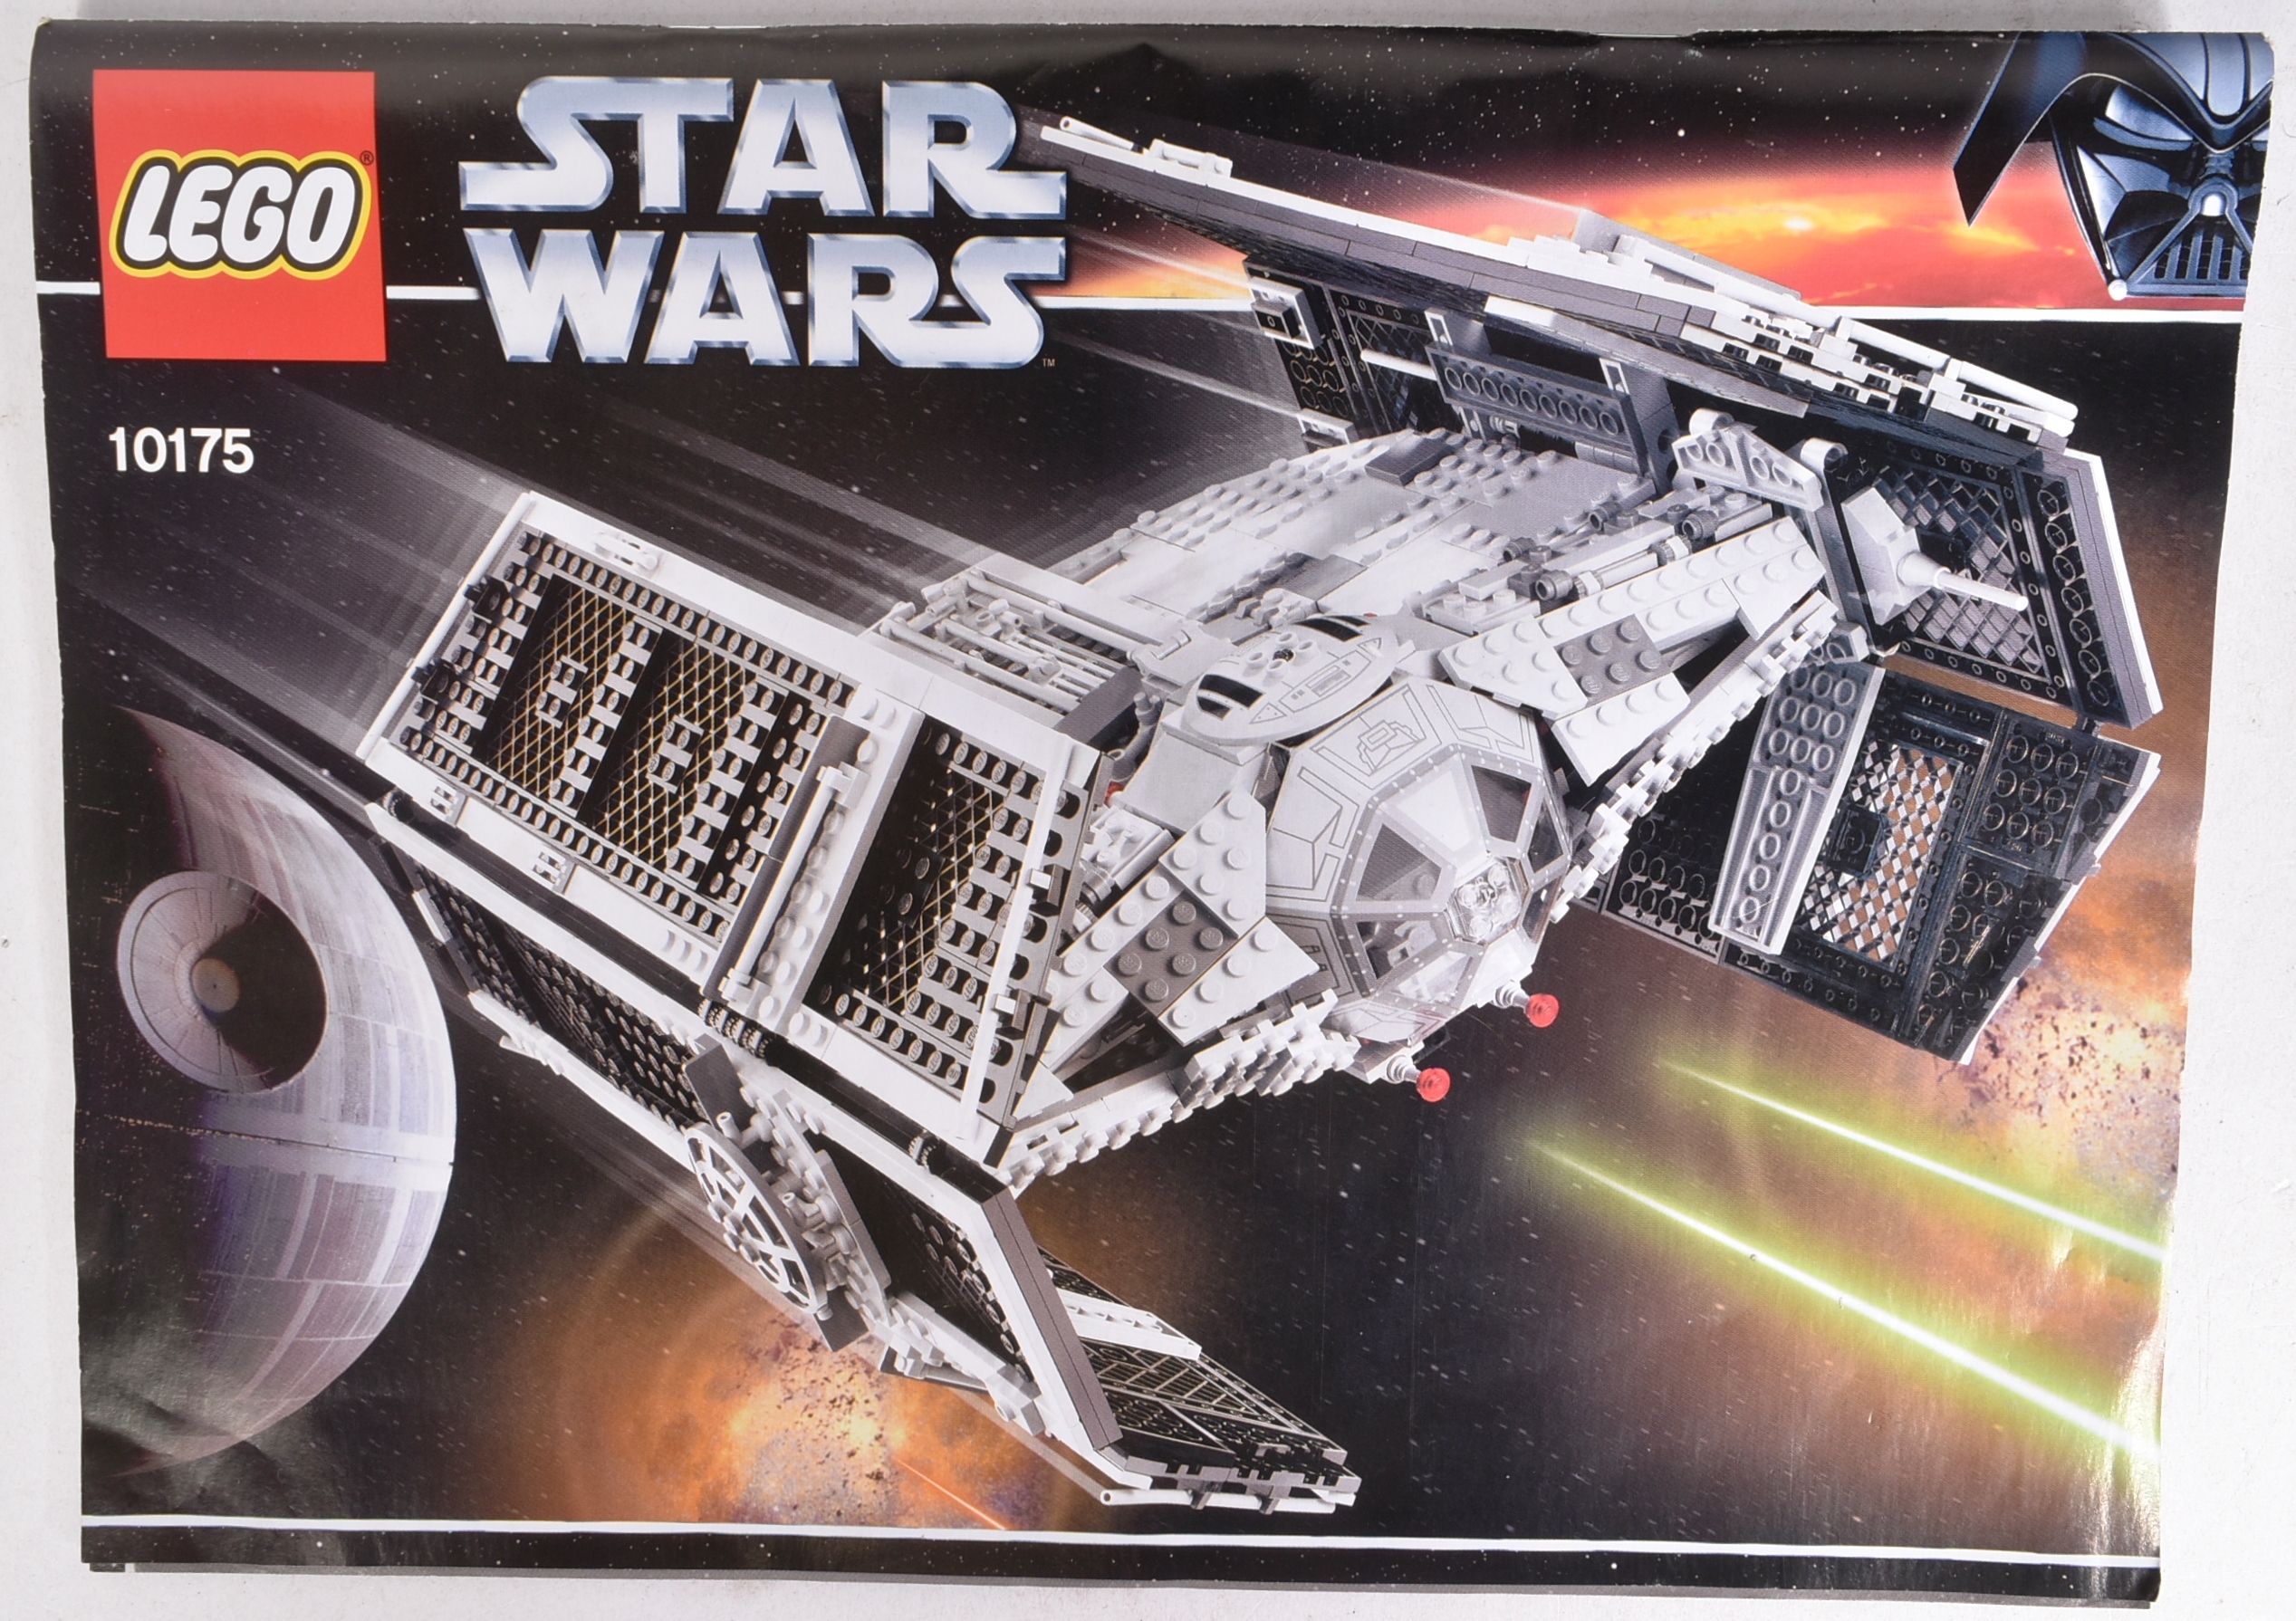 LEGO - STAR WARS - 10175 - VADERS TIE ADVANCED - Image 4 of 6